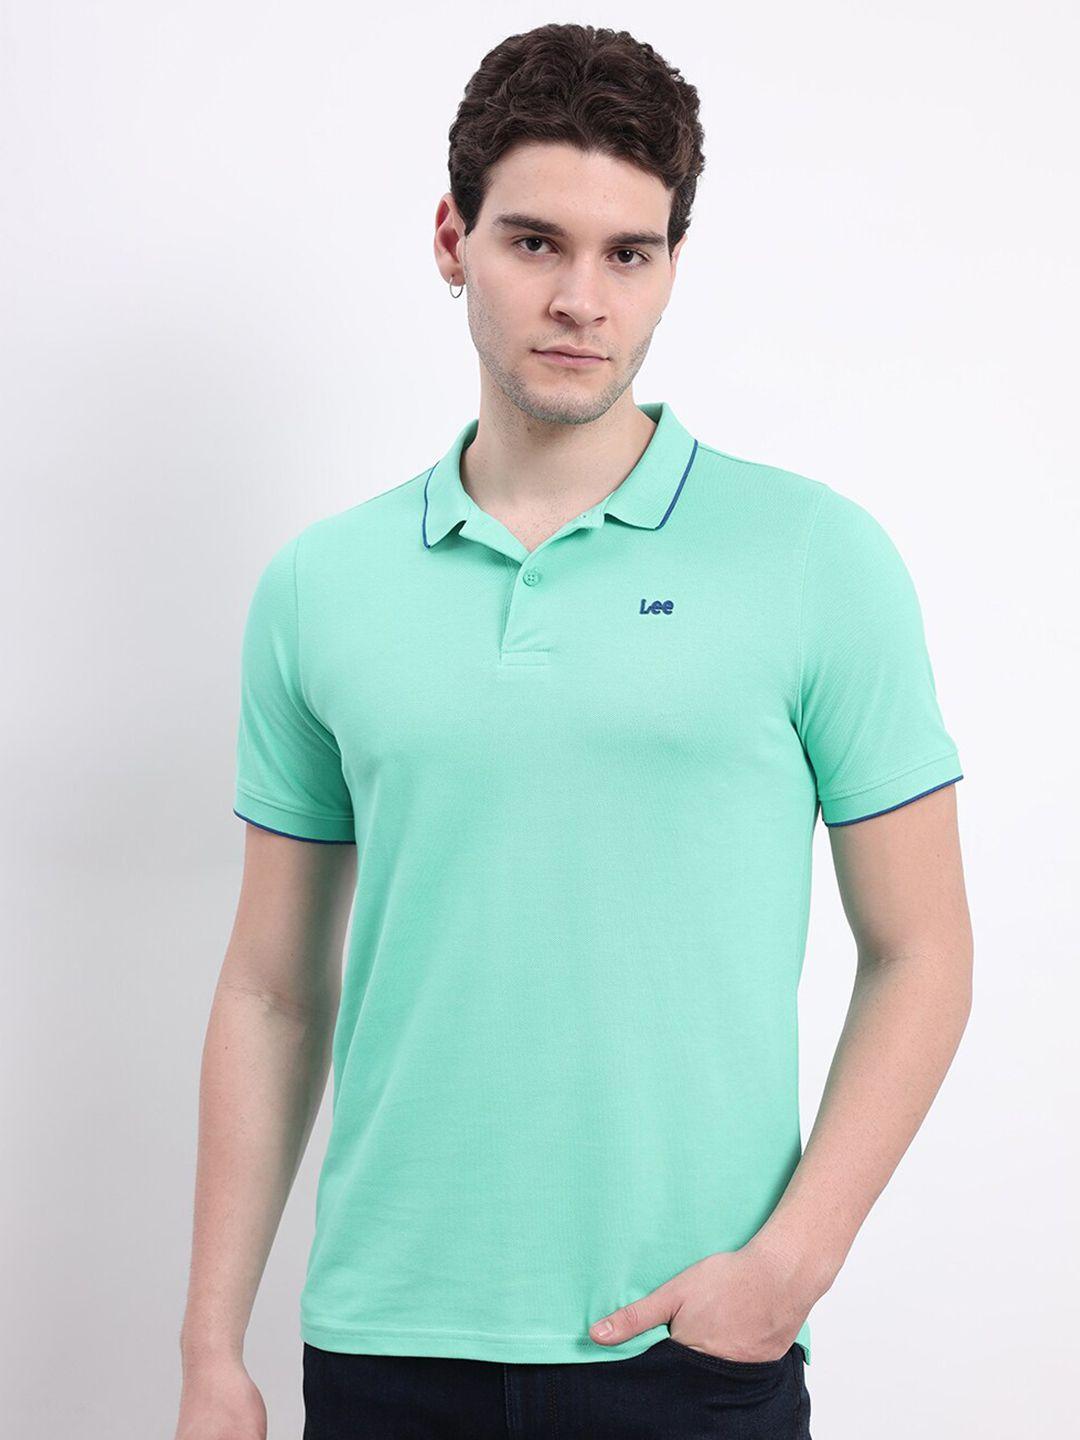 lee polo collar pure cotton slim fit t-shirt